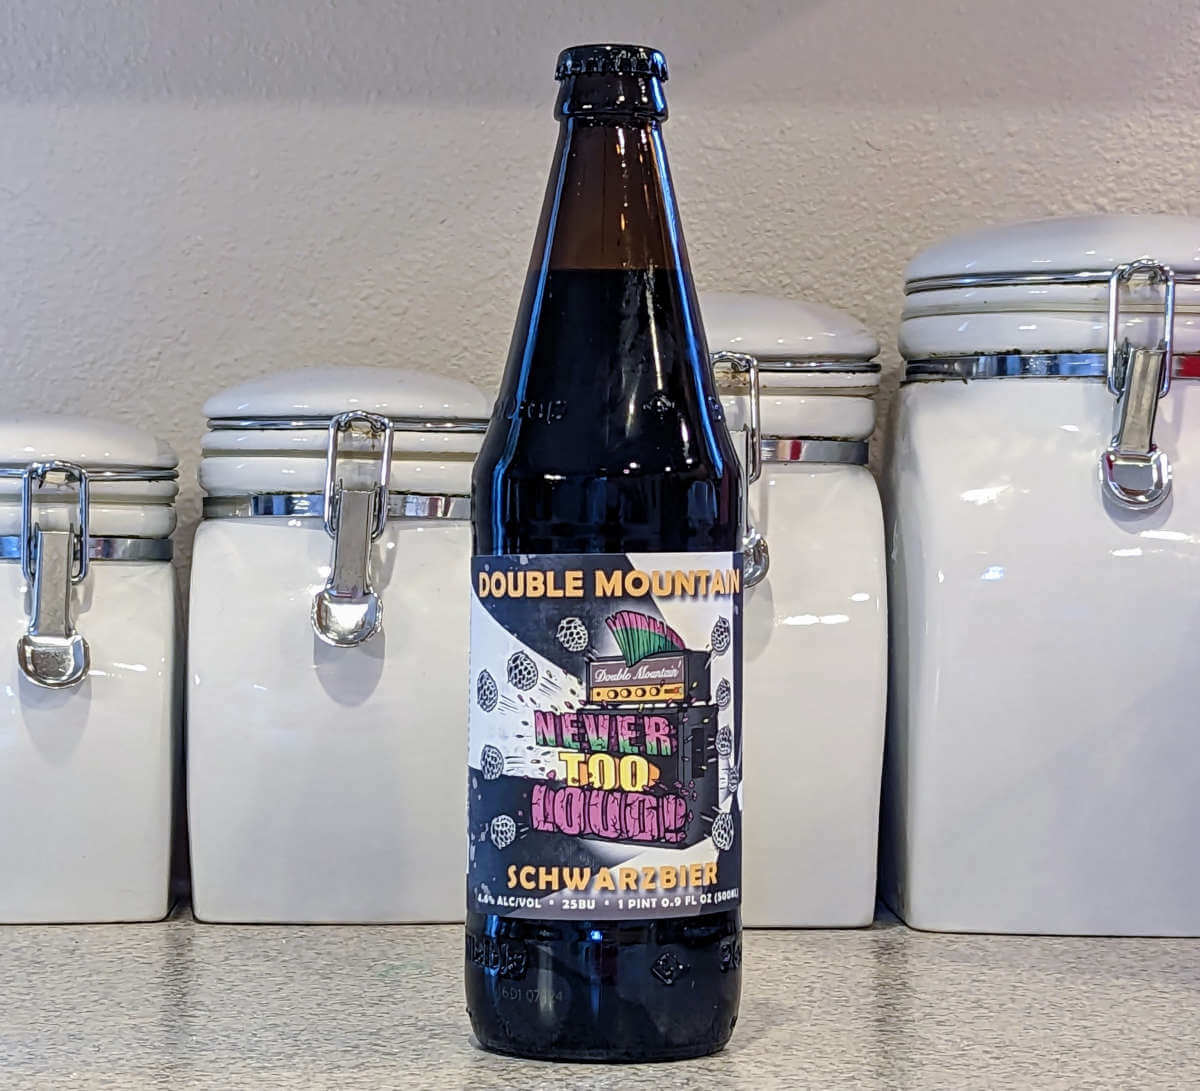 Double Mountain Brewery releases Never Too Loud Schwarzbier (received)